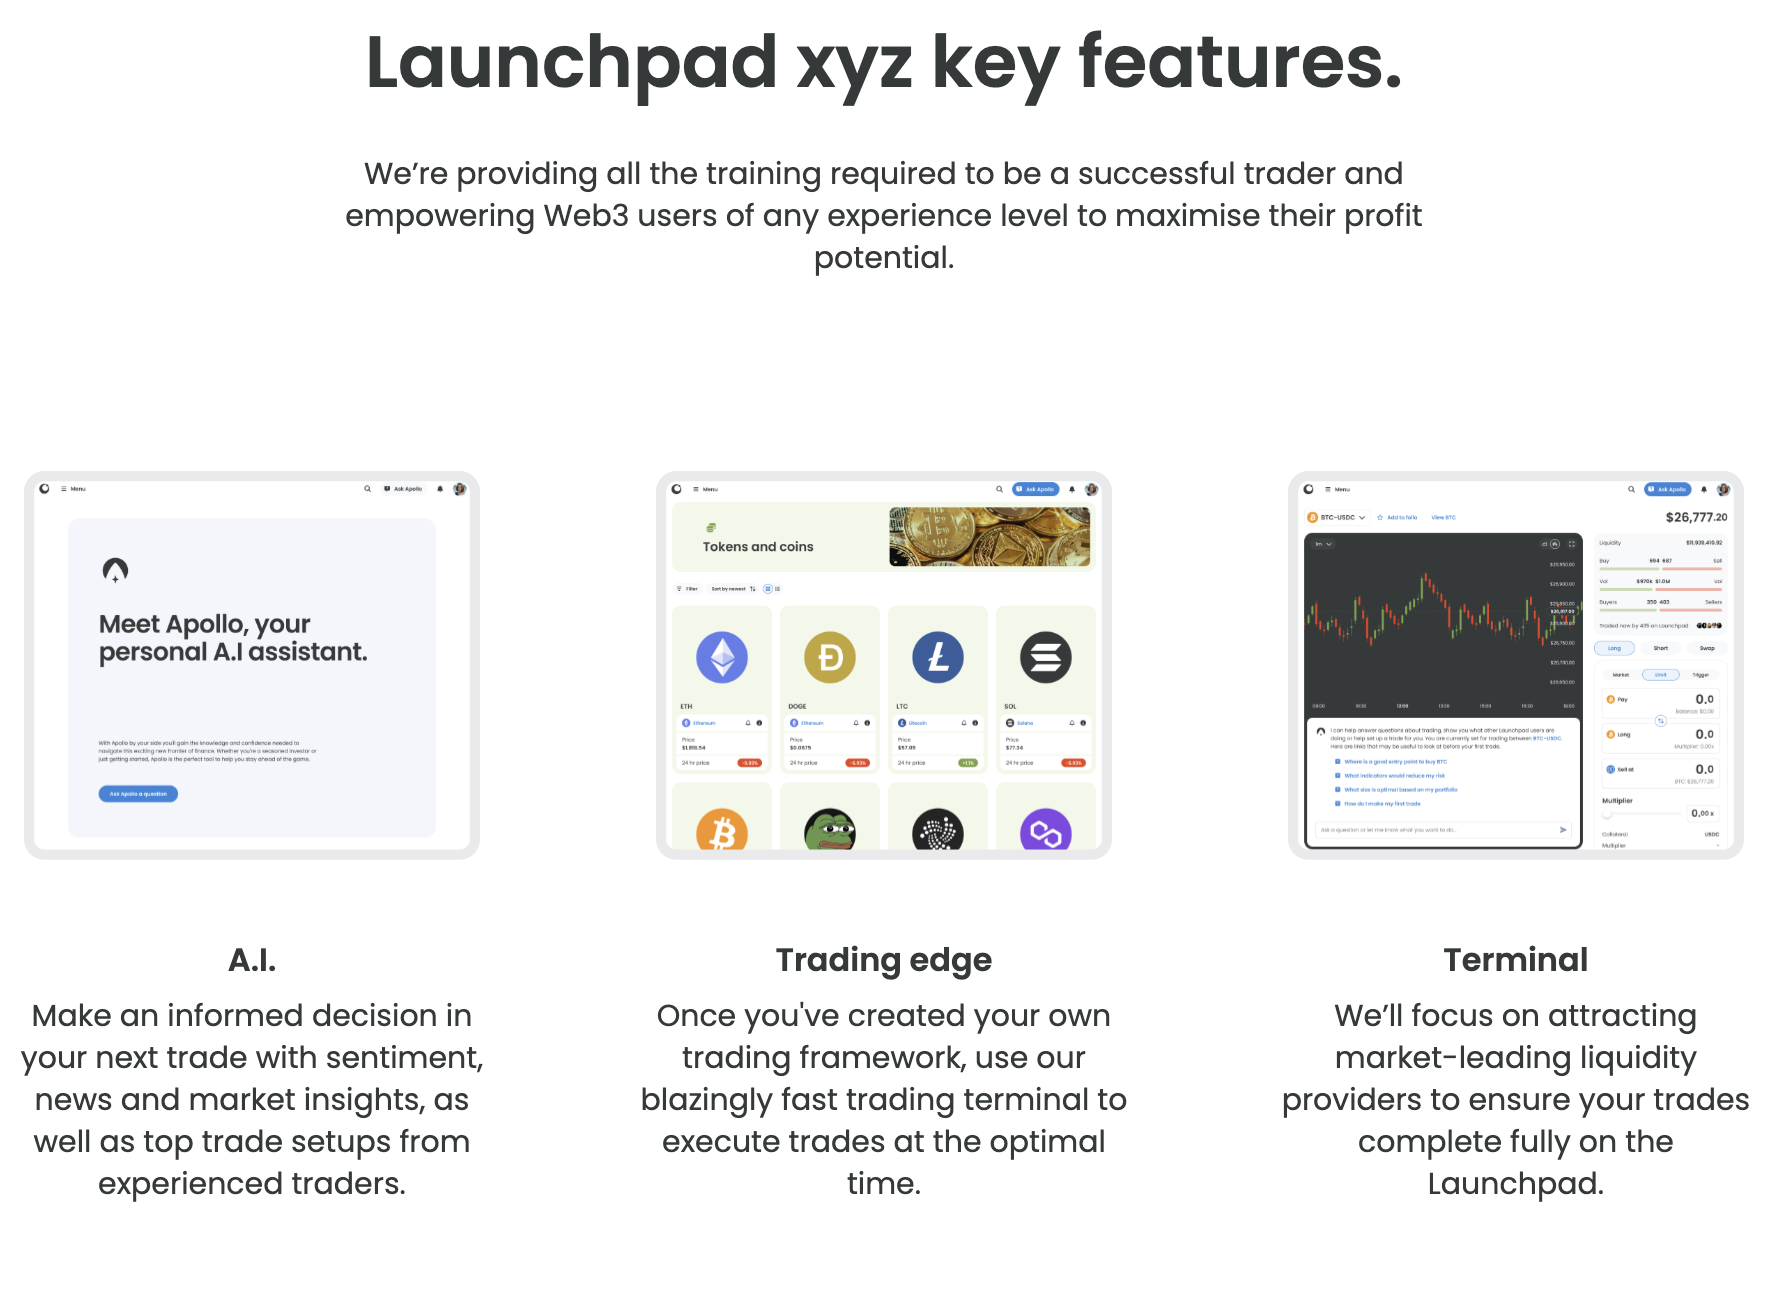 Launchpad XYZ features